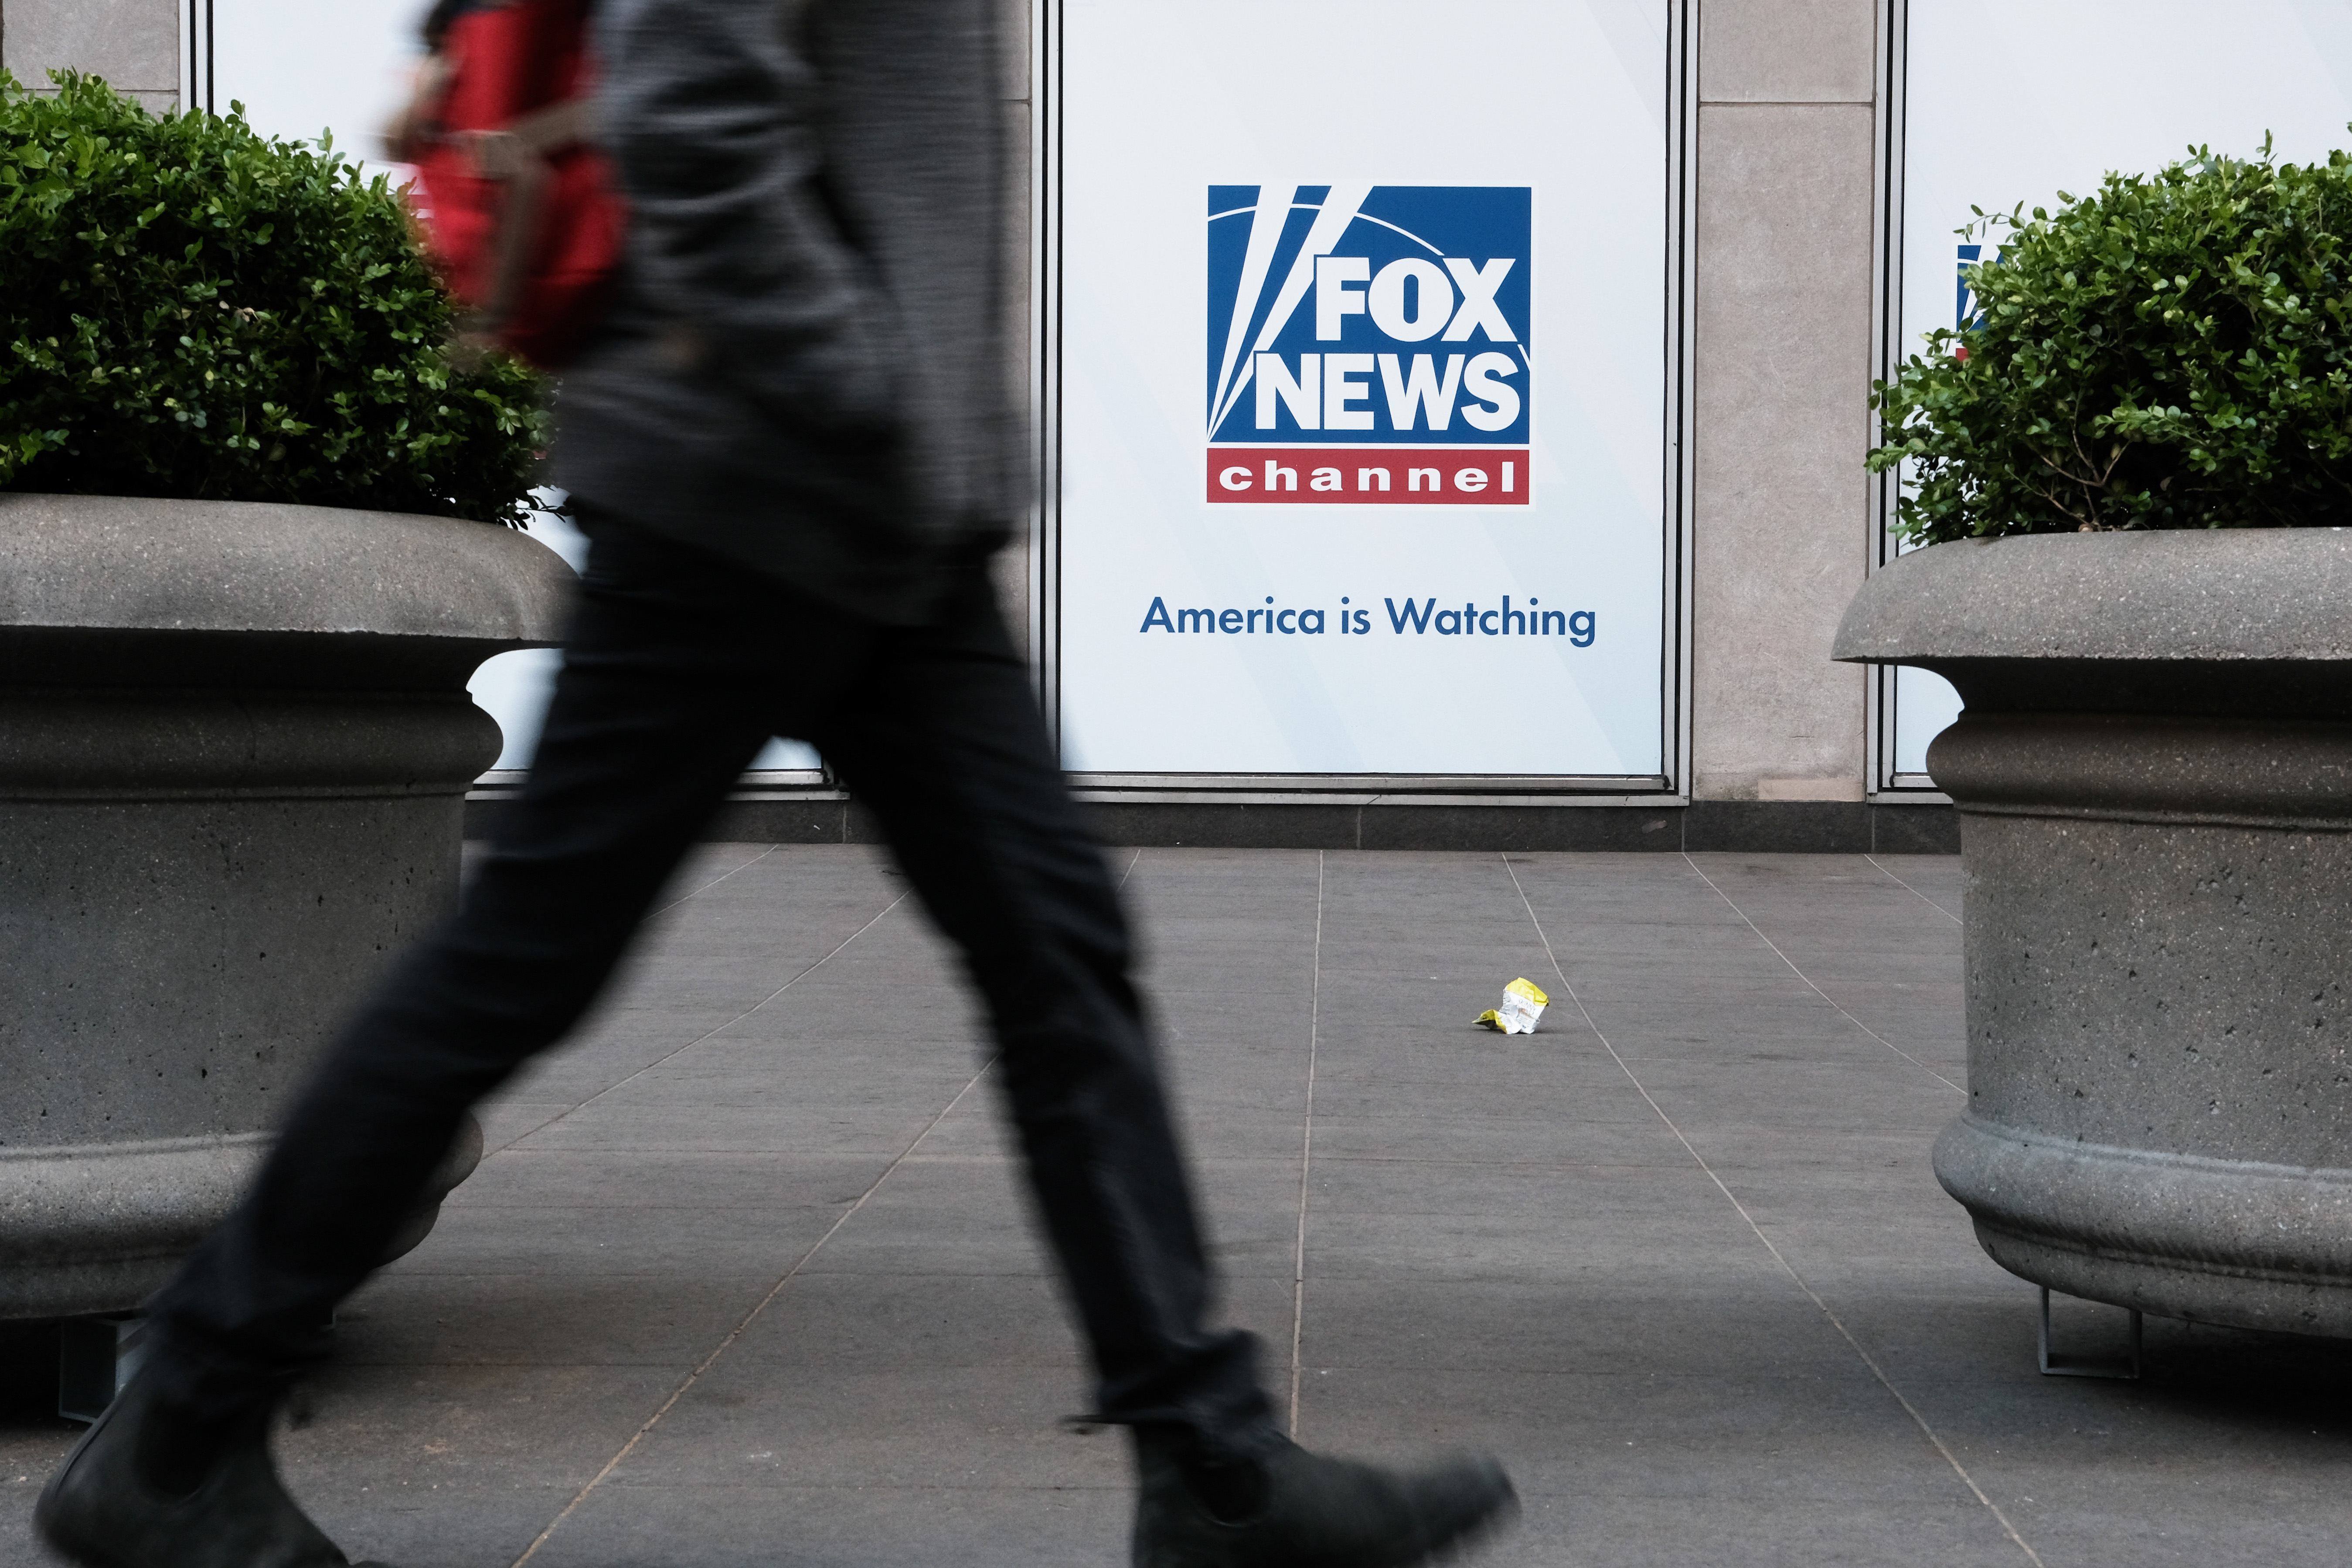 A person walks by the planters outside the News Corp headquarters in New York City, which is displaying a sign that reads “Fox News channel. America is watching.”